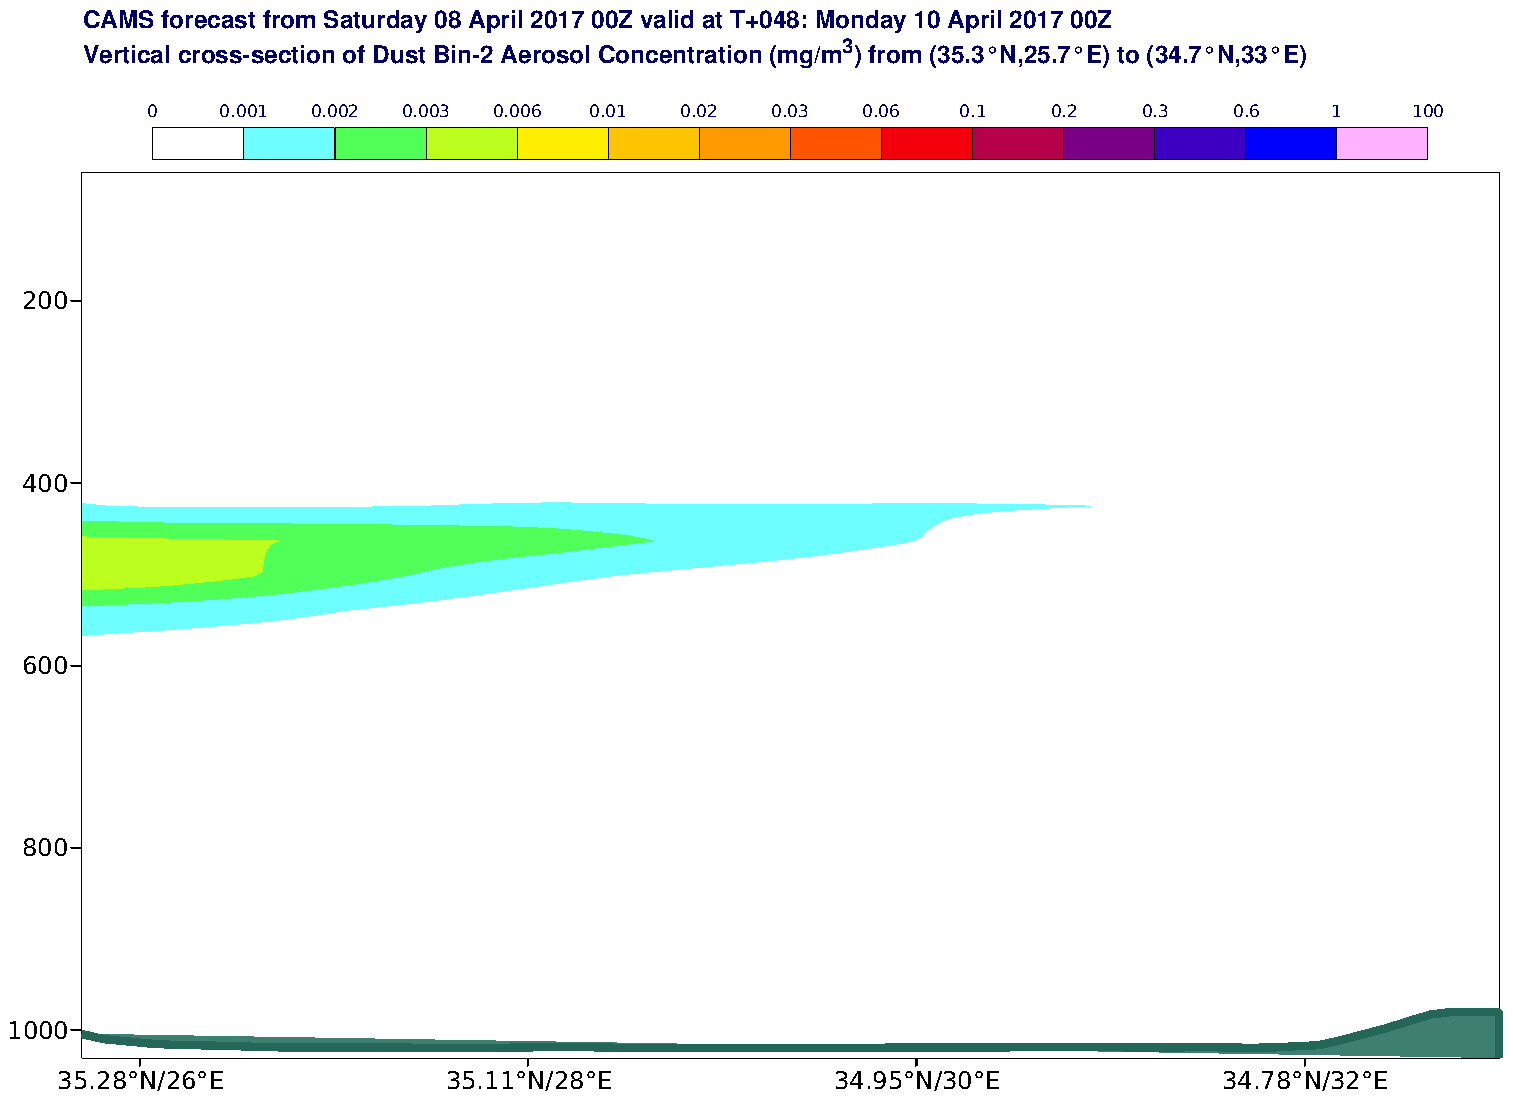 Vertical cross-section of Dust Bin-2 Aerosol Concentration (mg/m3) valid at T48 - 2017-04-10 00:00